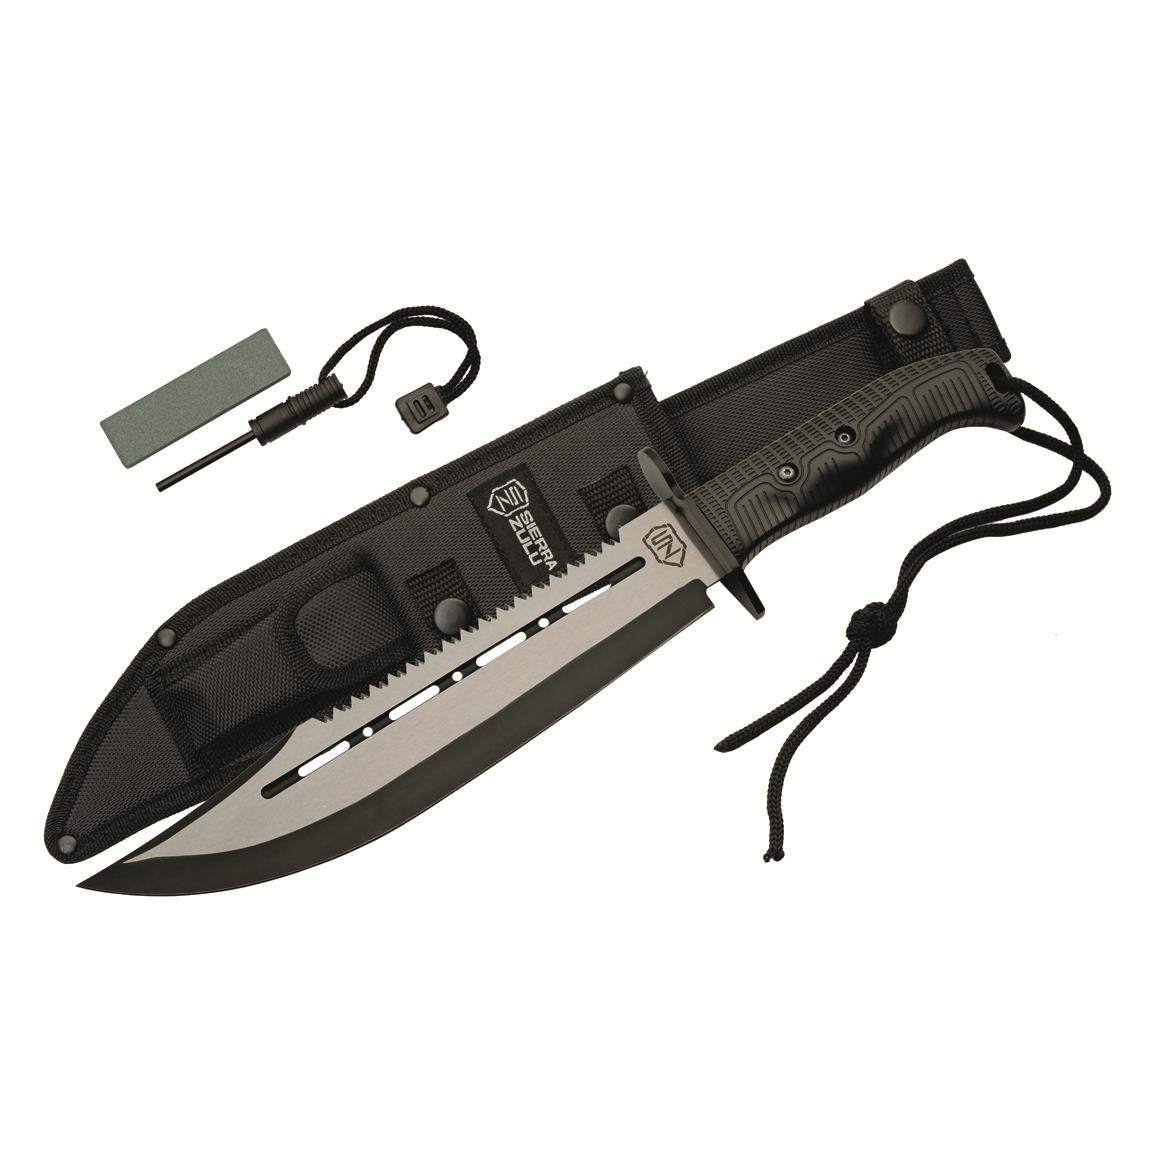 Military Bowie Knife | Sportsman's Guide | Sportsman's Guide